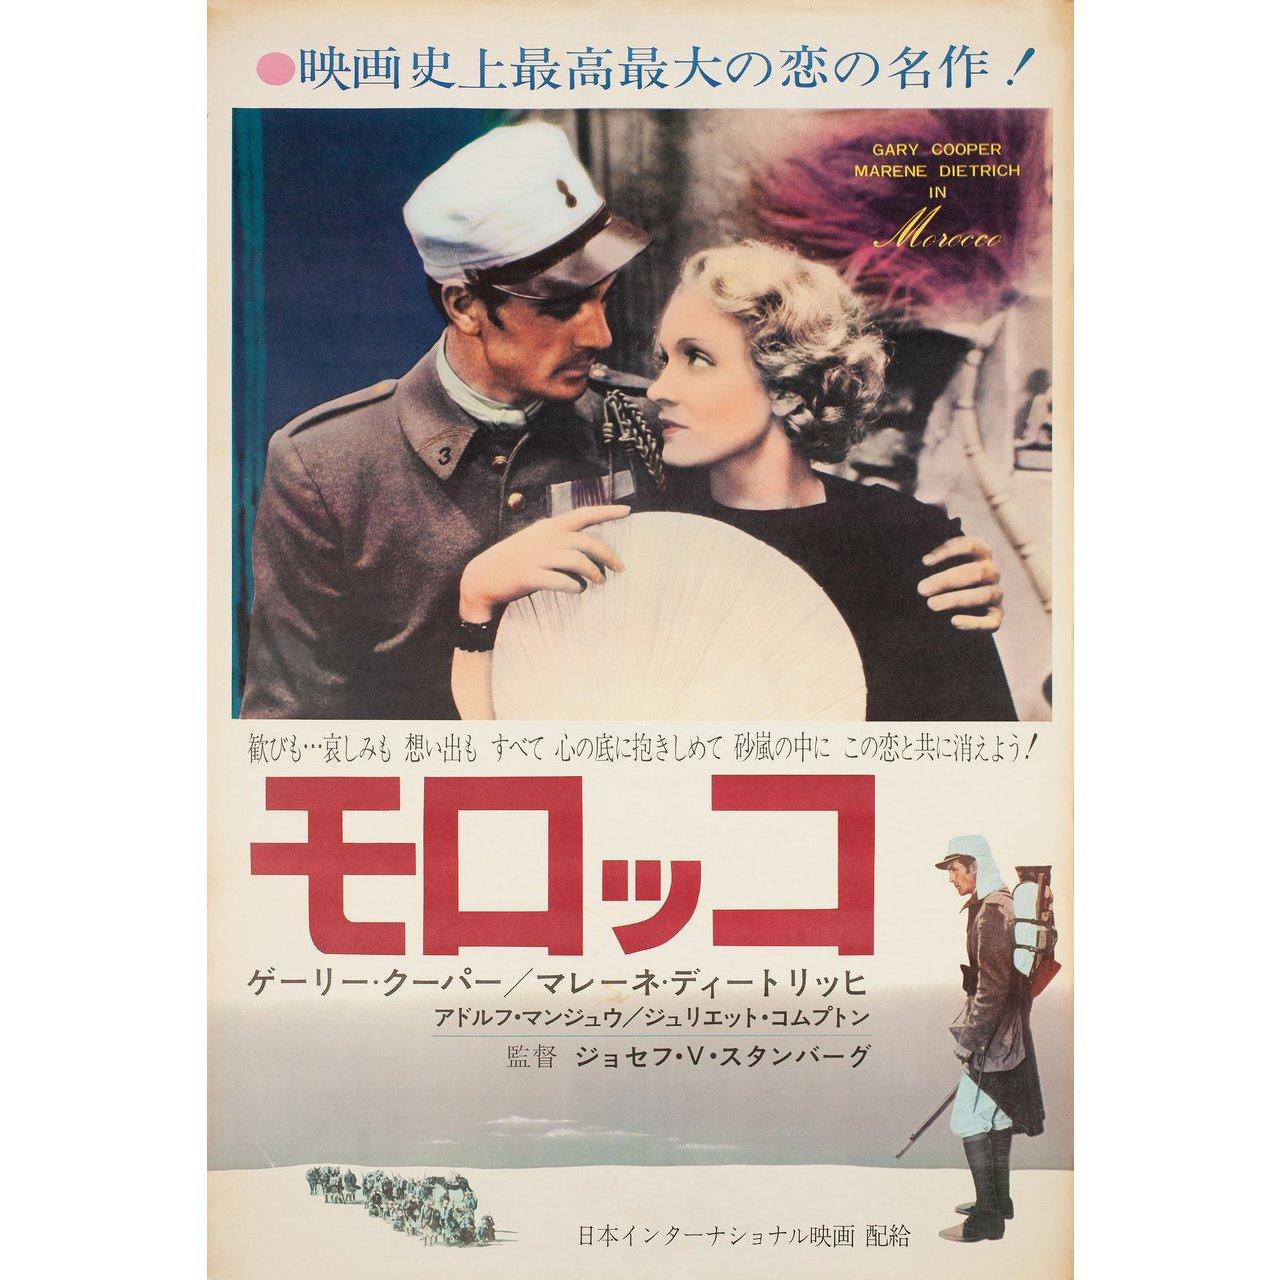 Original 1960s re-release Japanese B2 poster for the 1930 film Morocco directed by Josef von Sternberg with Gary Cooper / Marlene Dietrich / Adolphe Menjou / Ullrich Haupt. Very Good-Fine condition, rolled. Please note: the size is stated in inches